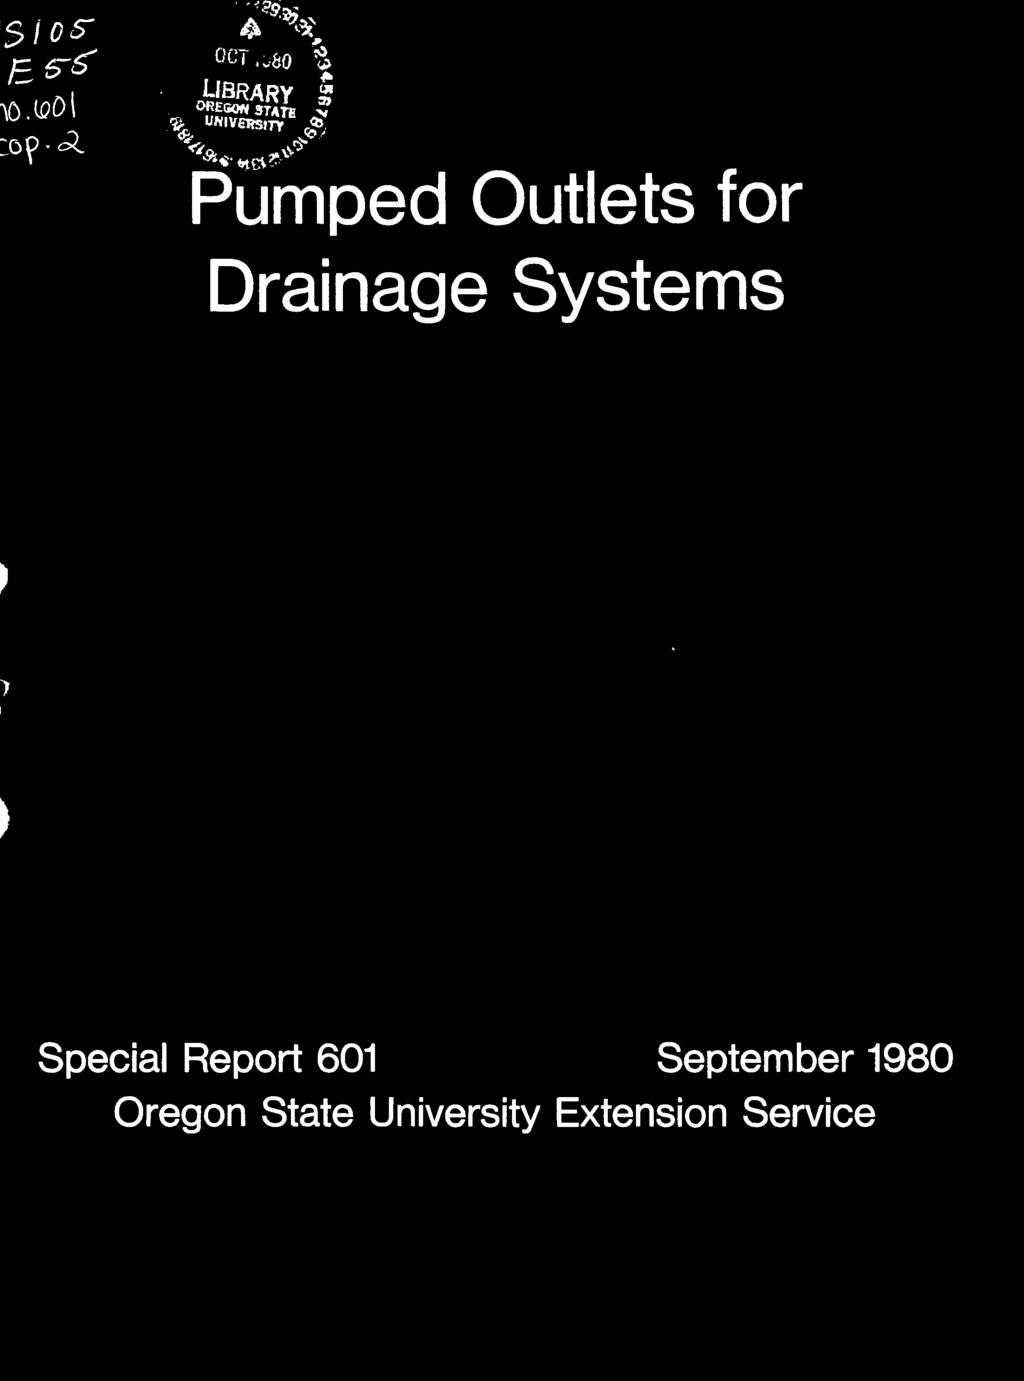 Pumped Outlets for Drainage Systems